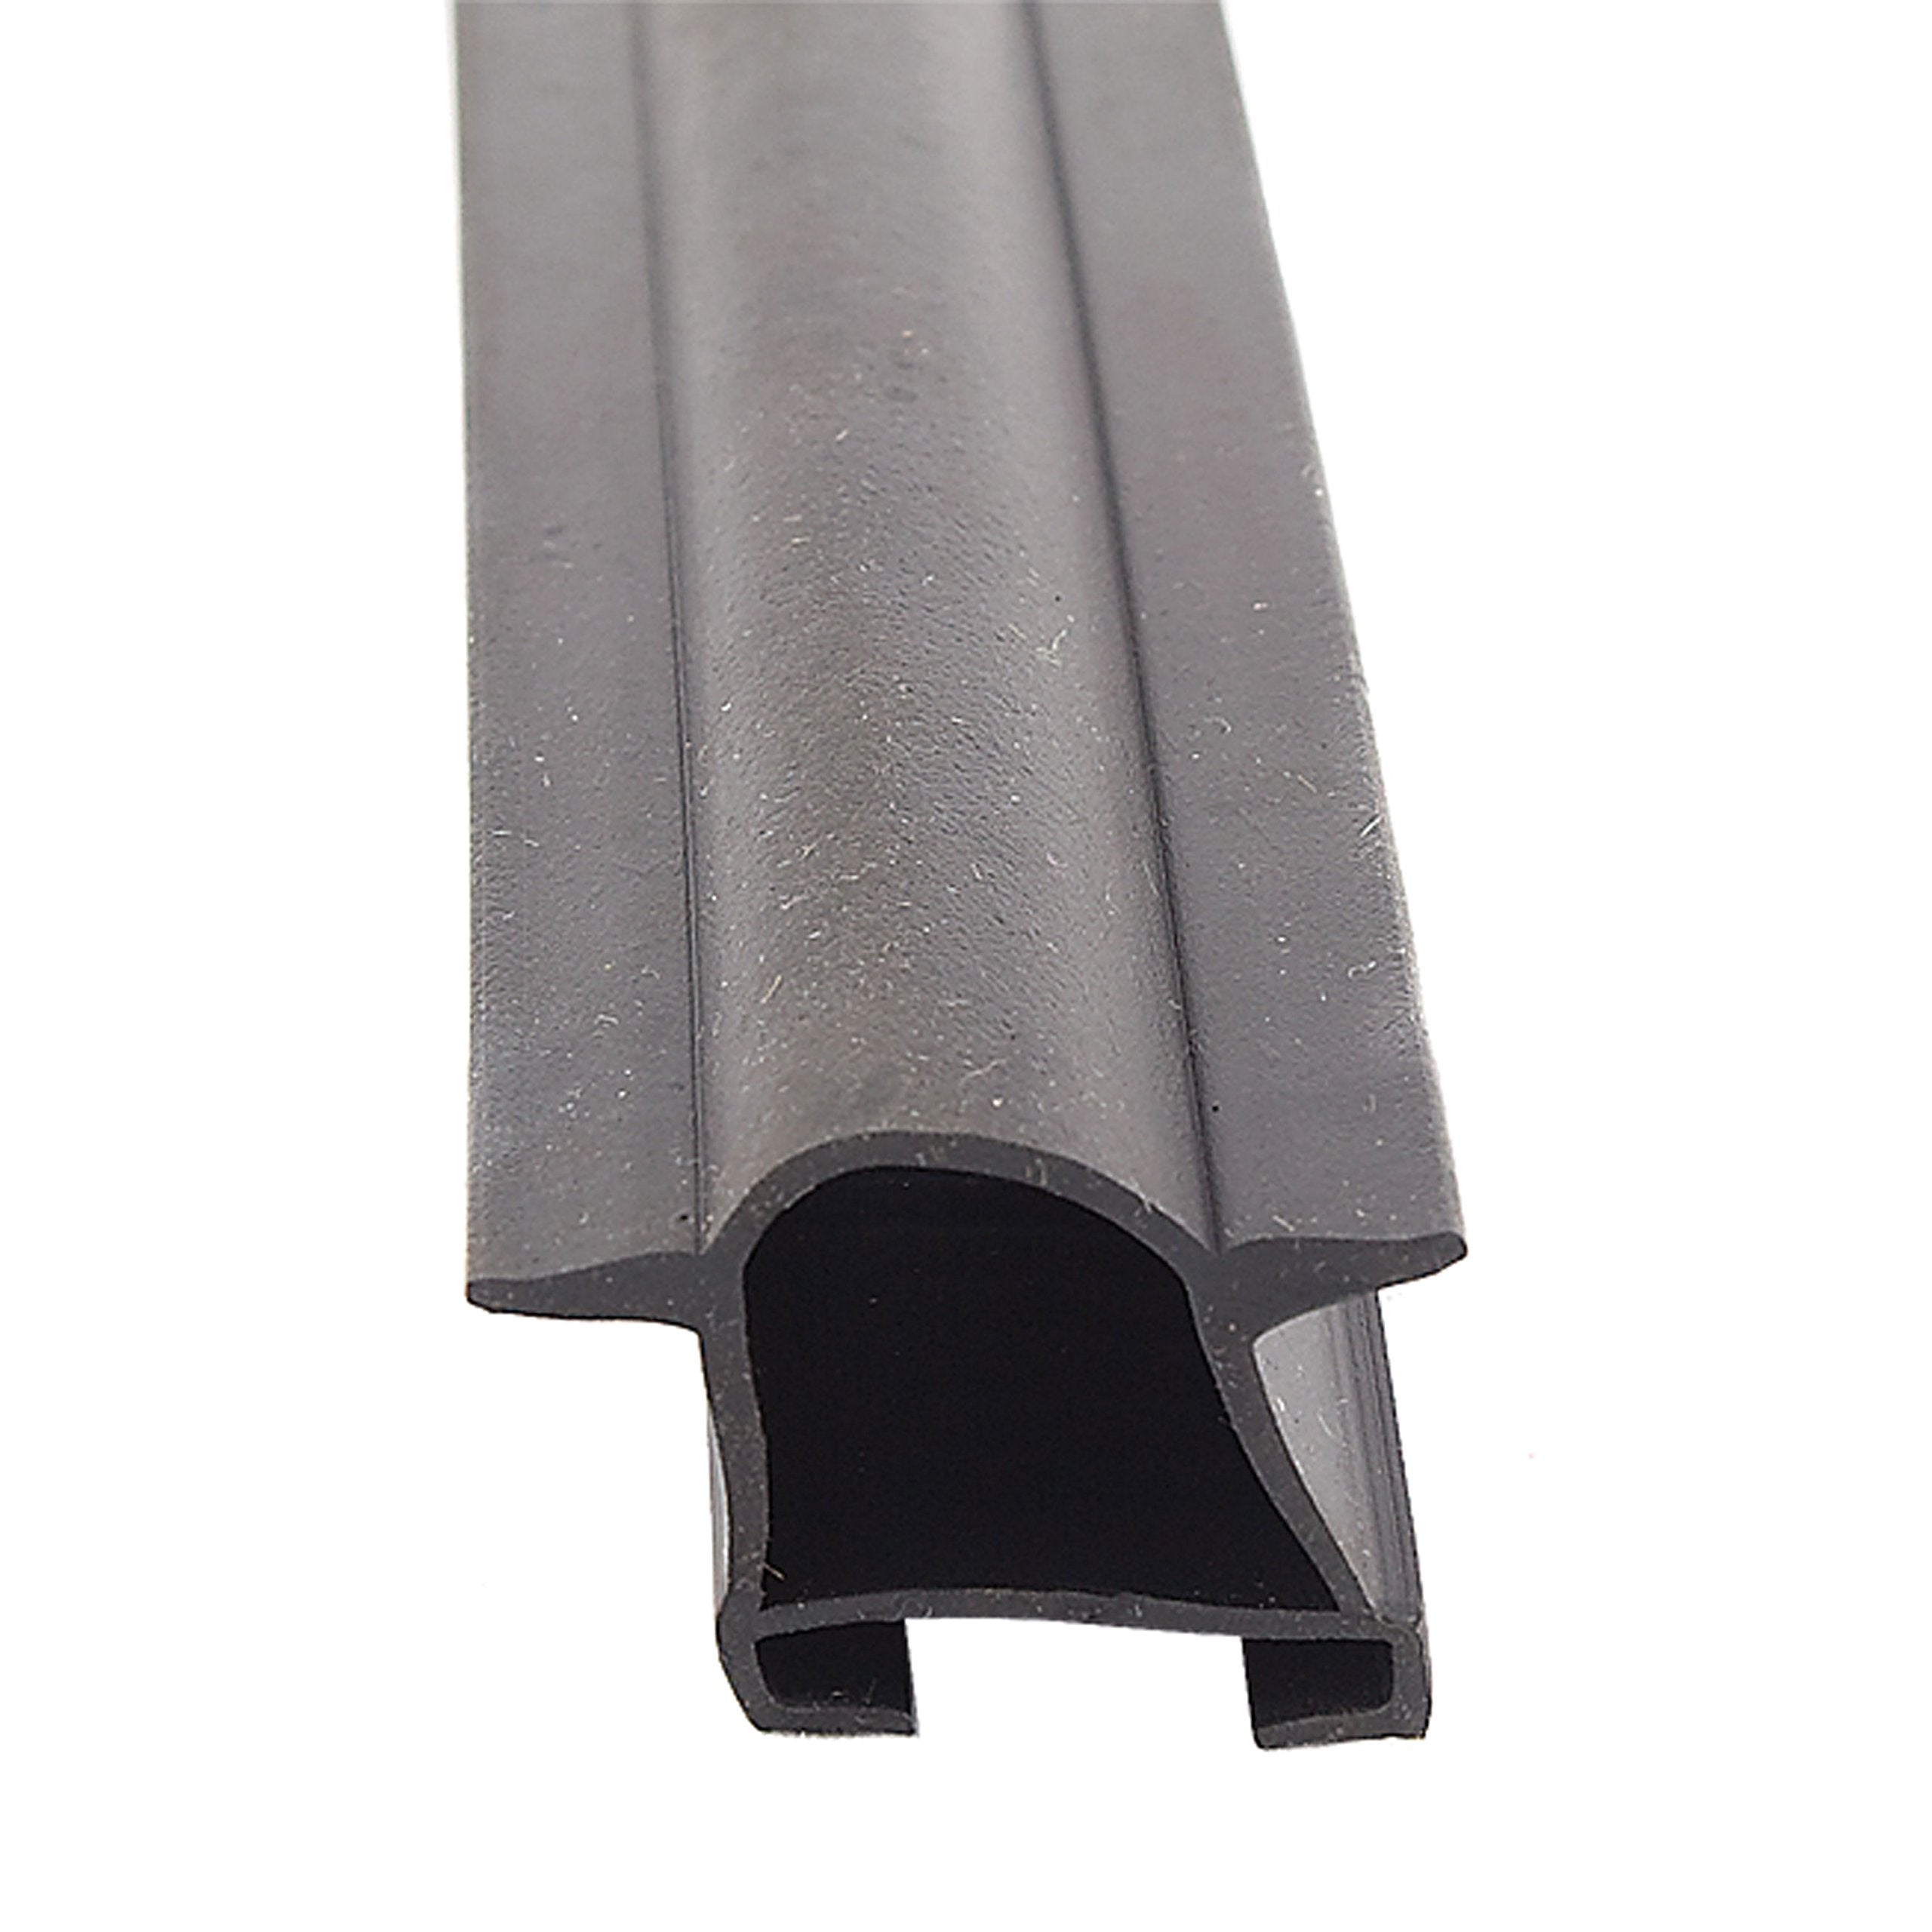 AP Products 018-522 EK Slide-On D Seal with Fins, 1-1/2" x 1" x 40'